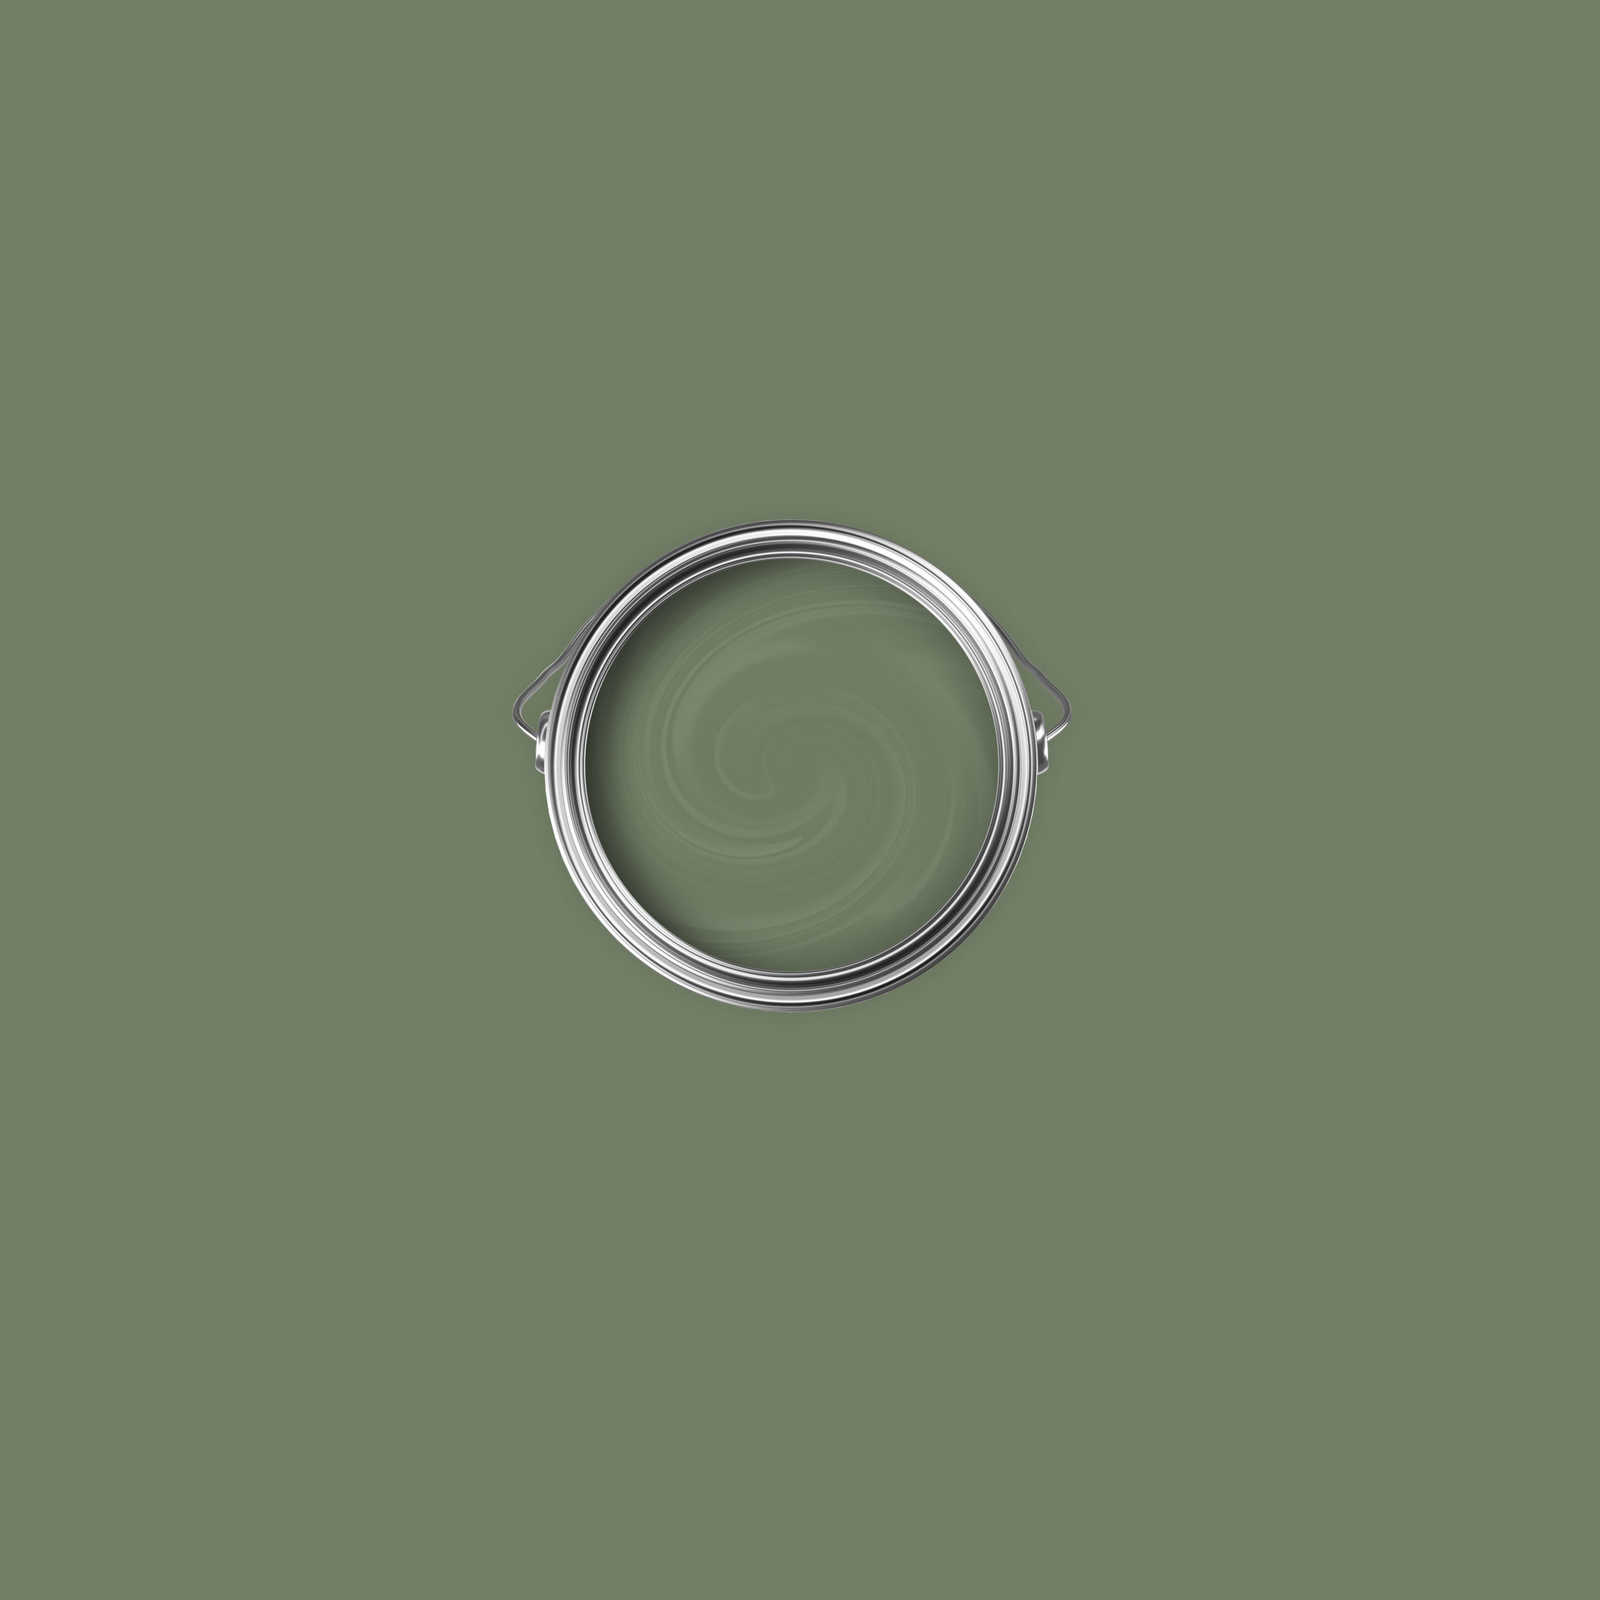             Premium Wall Paint Relaxing Olive Green »Gorgeous Green« NW504 – 1 litre
        